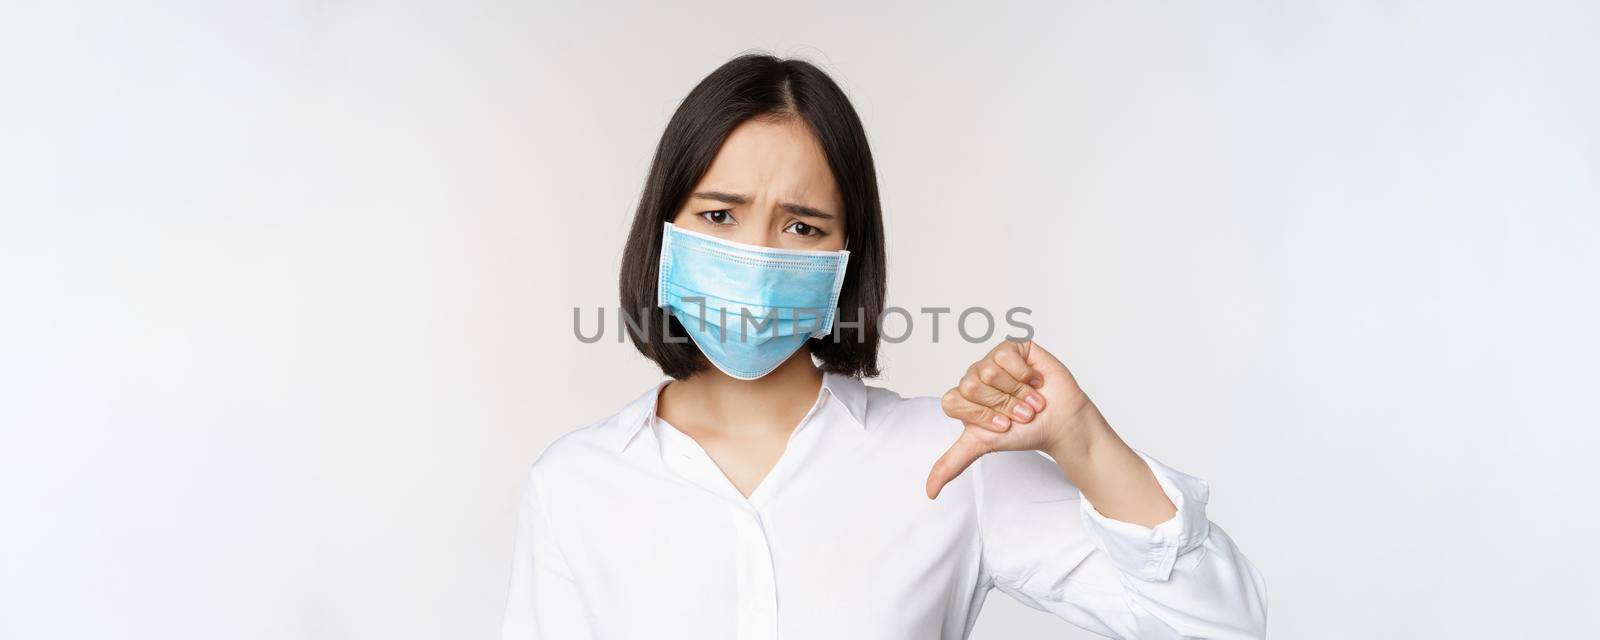 Portrait of asian woman in medical face mask showing thumbs down with disappointed, tired face expression, standing over white background.